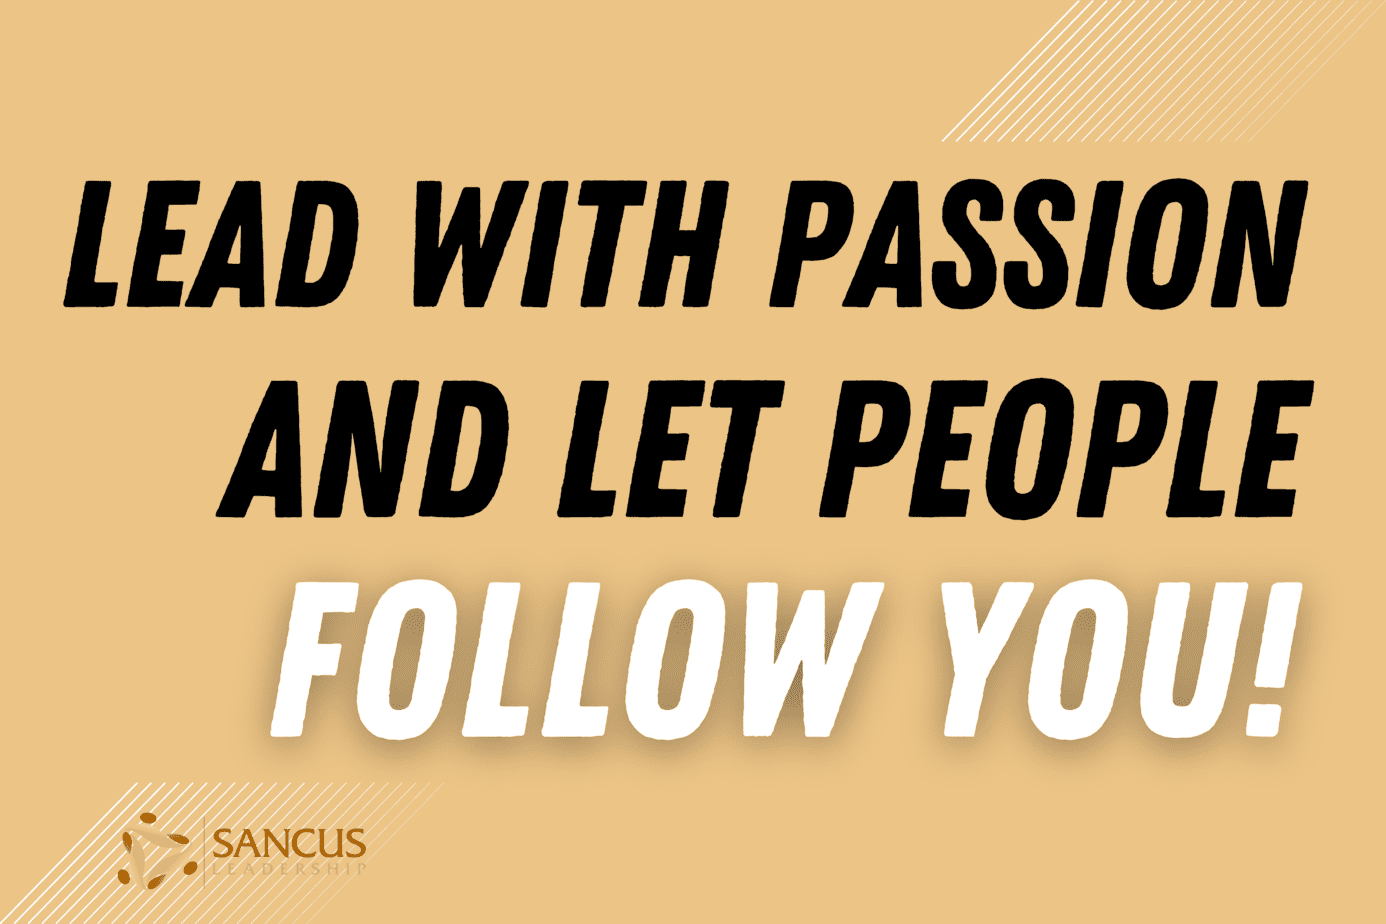 How To Lead With Passion so That People Want To Follow You